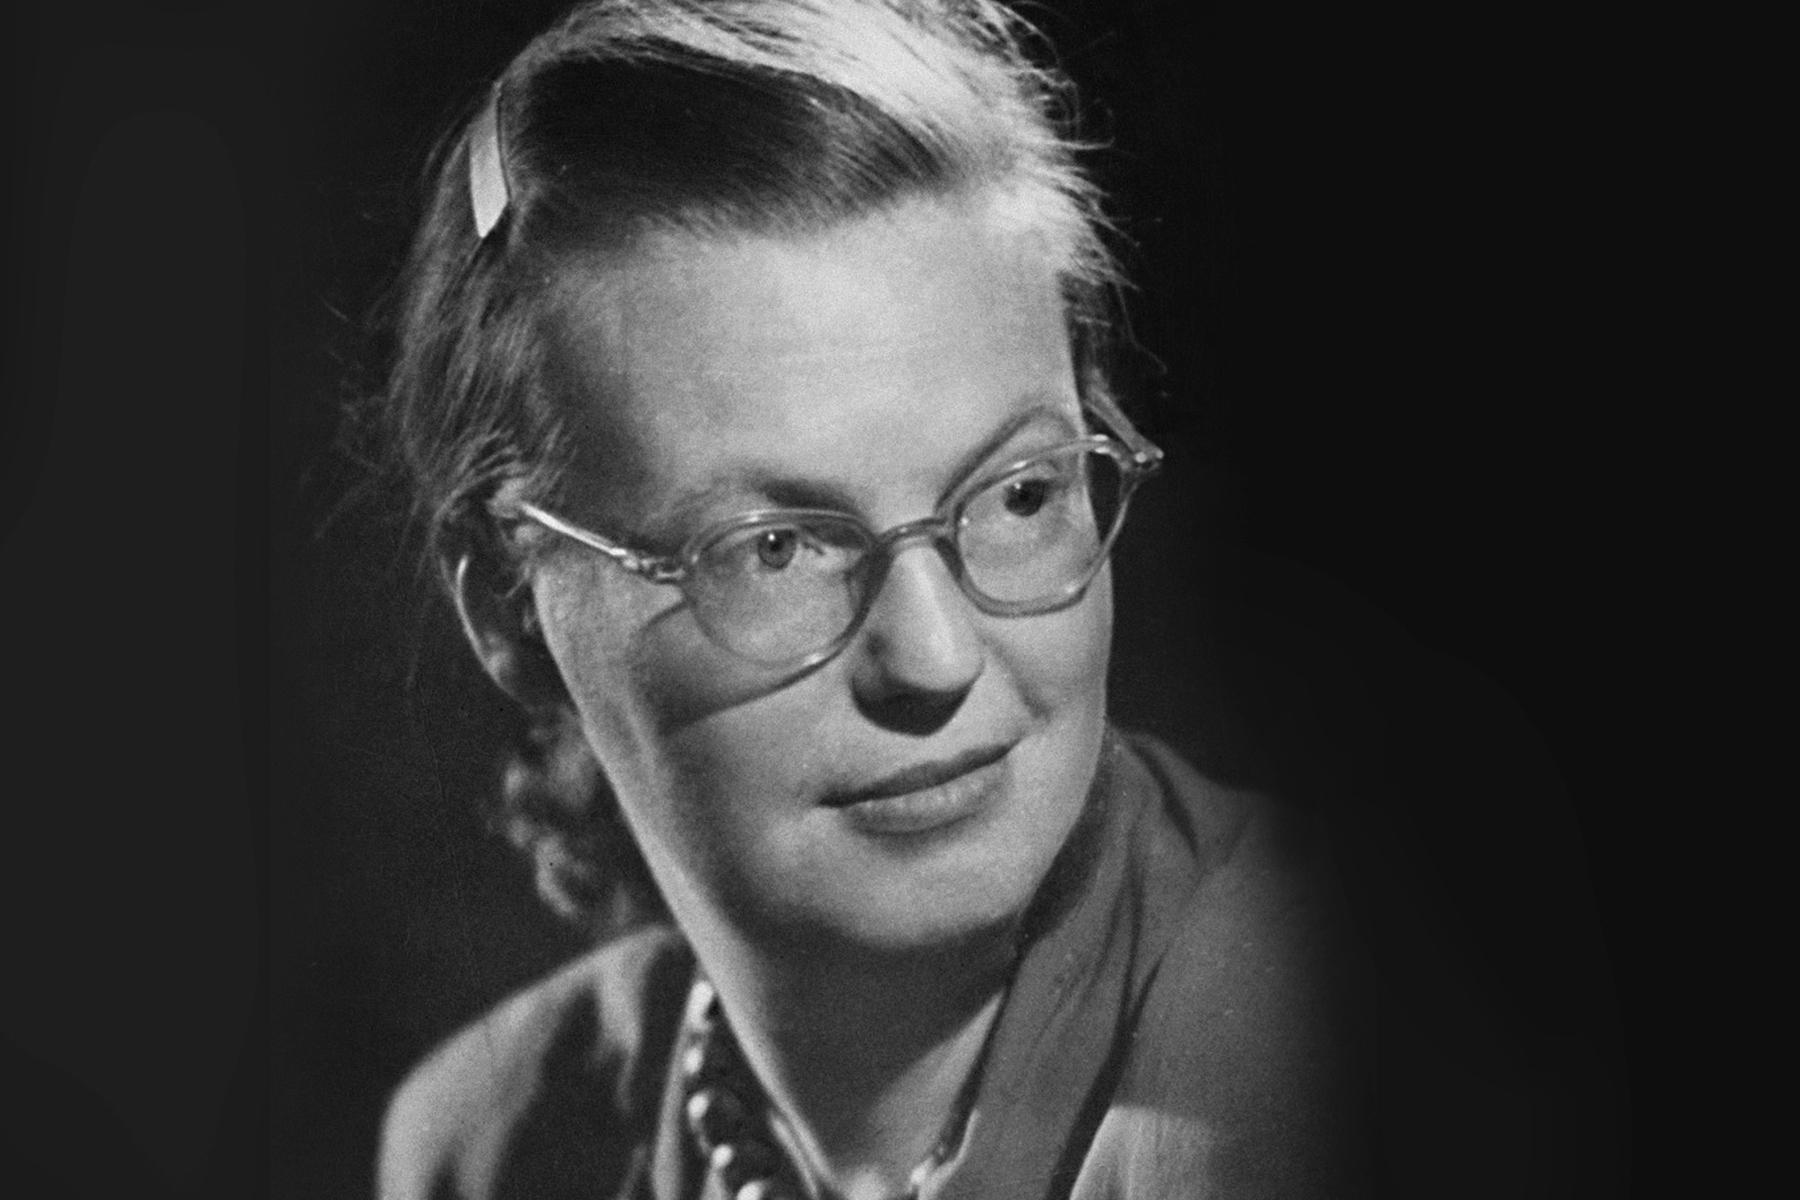 Eerie, anxious, foreboding: no wonder we can't get enough of Shirley Jackson